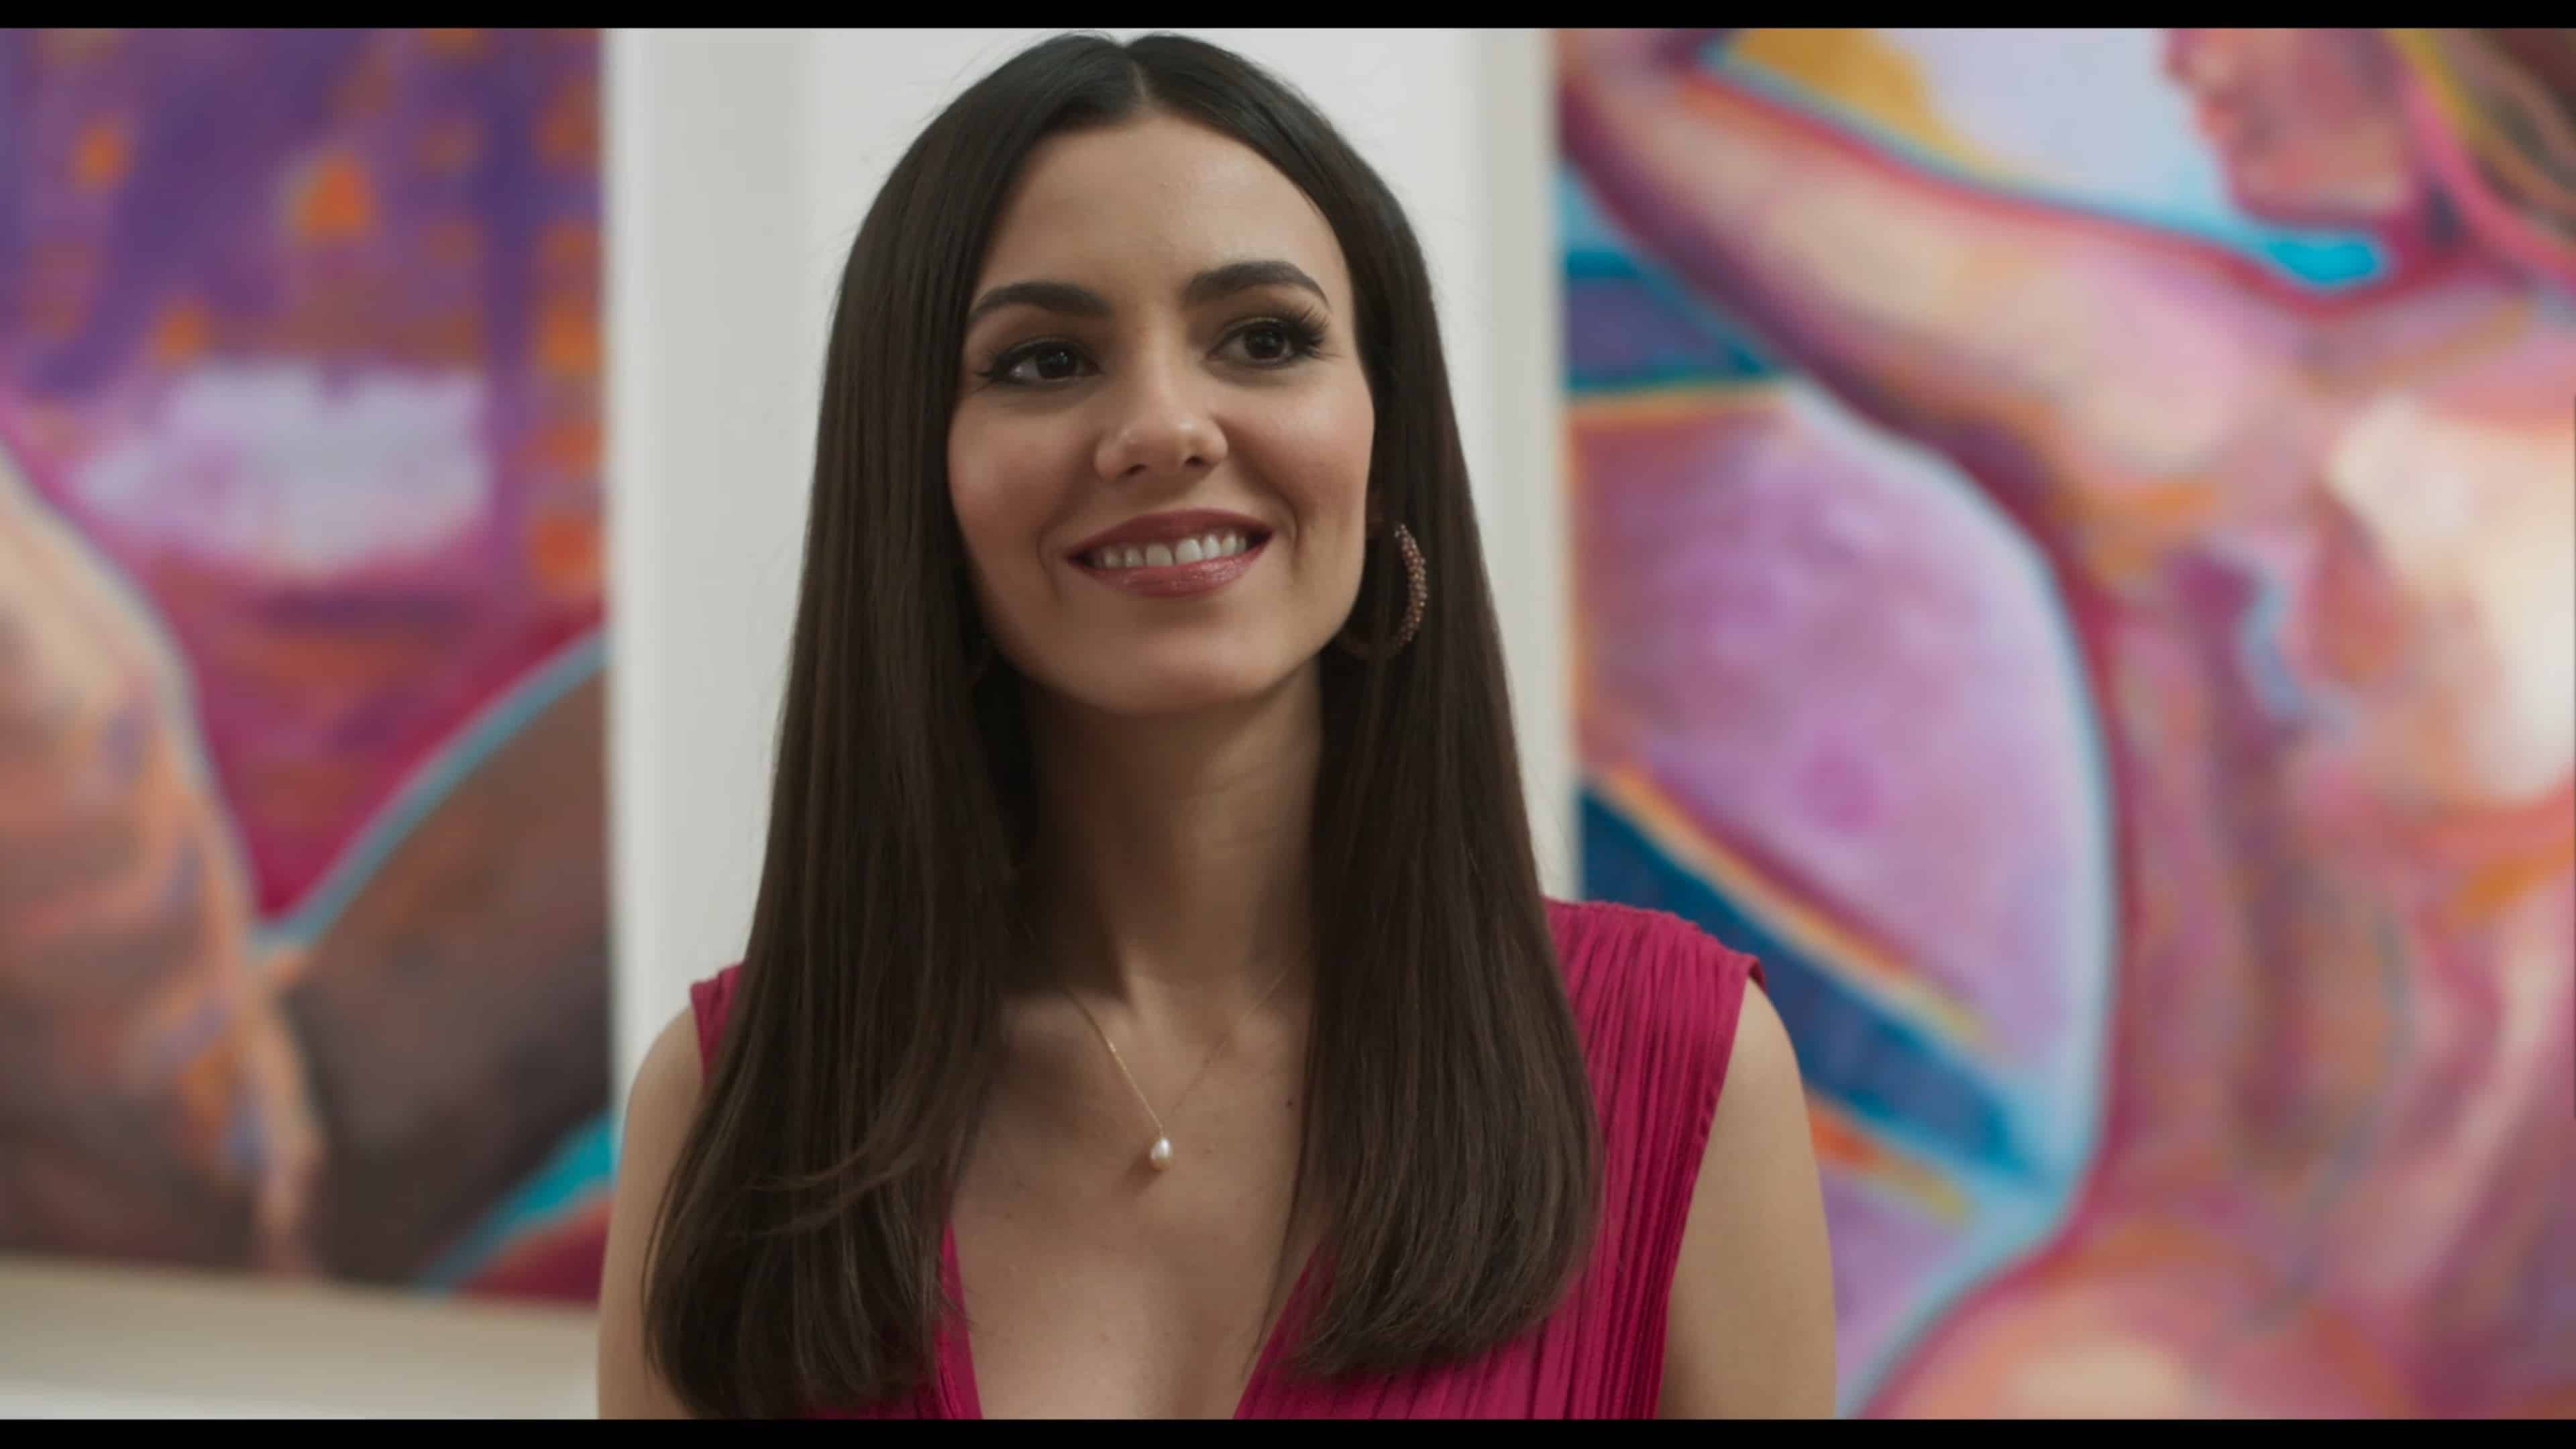 Brooke (Victoria Justice) at her gallery opening